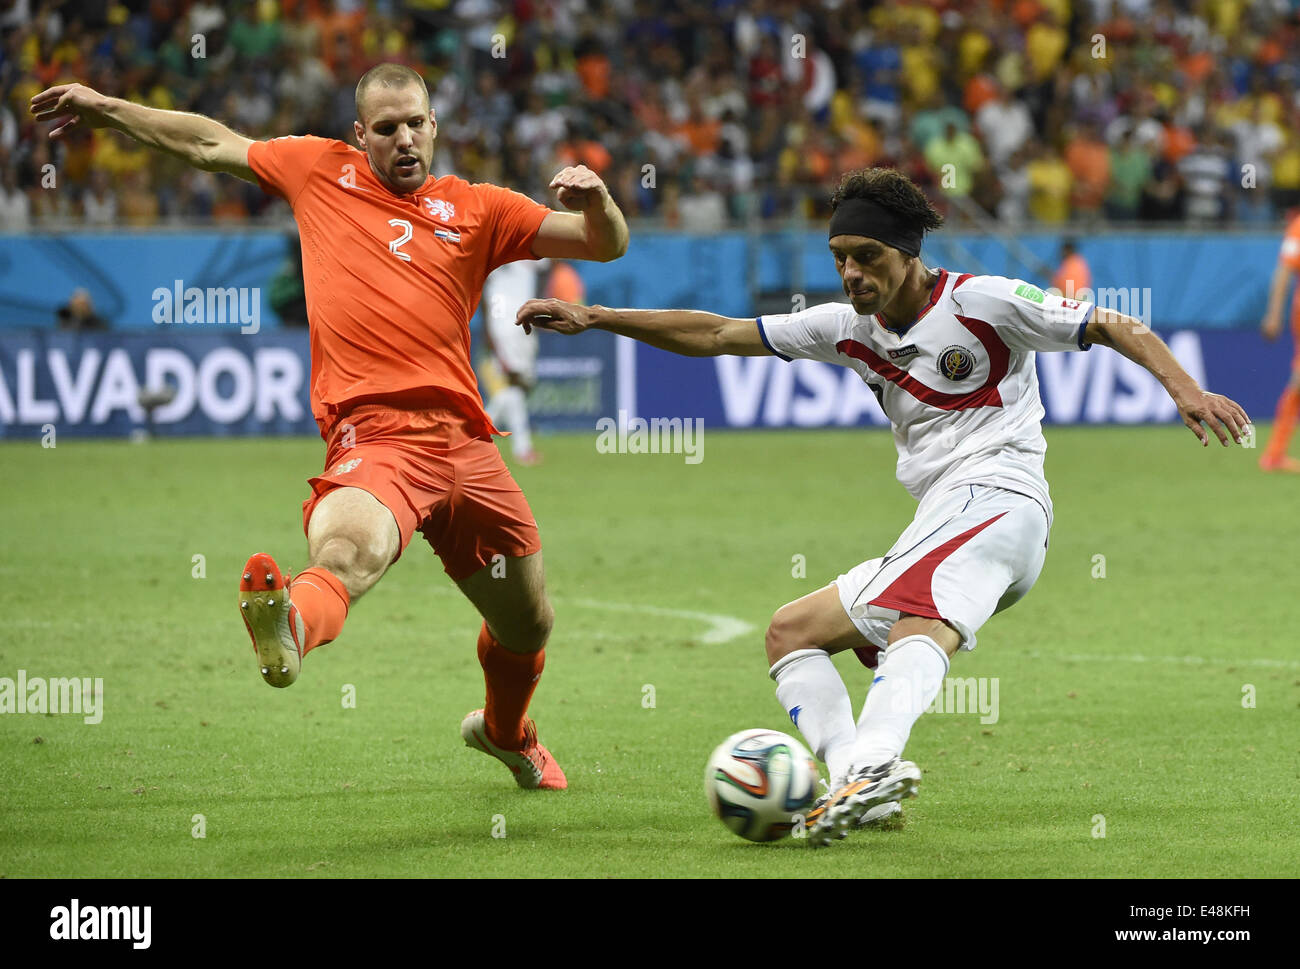 Salvador, Brazil. 5th July, 2014. Netherlands' Ron Vlaar vies with Costa Rica's Christian Bolanos during a quarter-finals match between Netherlands and Costa Rica of 2014 FIFA World Cup at the Arena Fonte Nova Stadium in Salvador, Brazil, on July 5, 2014. Netherlands won 4-3 on penalties over Costa Rica after a 0-0 tie and qualified for semi-finals on Saturday. Credit:  Lui Siu Wai/Xinhua/Alamy Live News Stock Photo